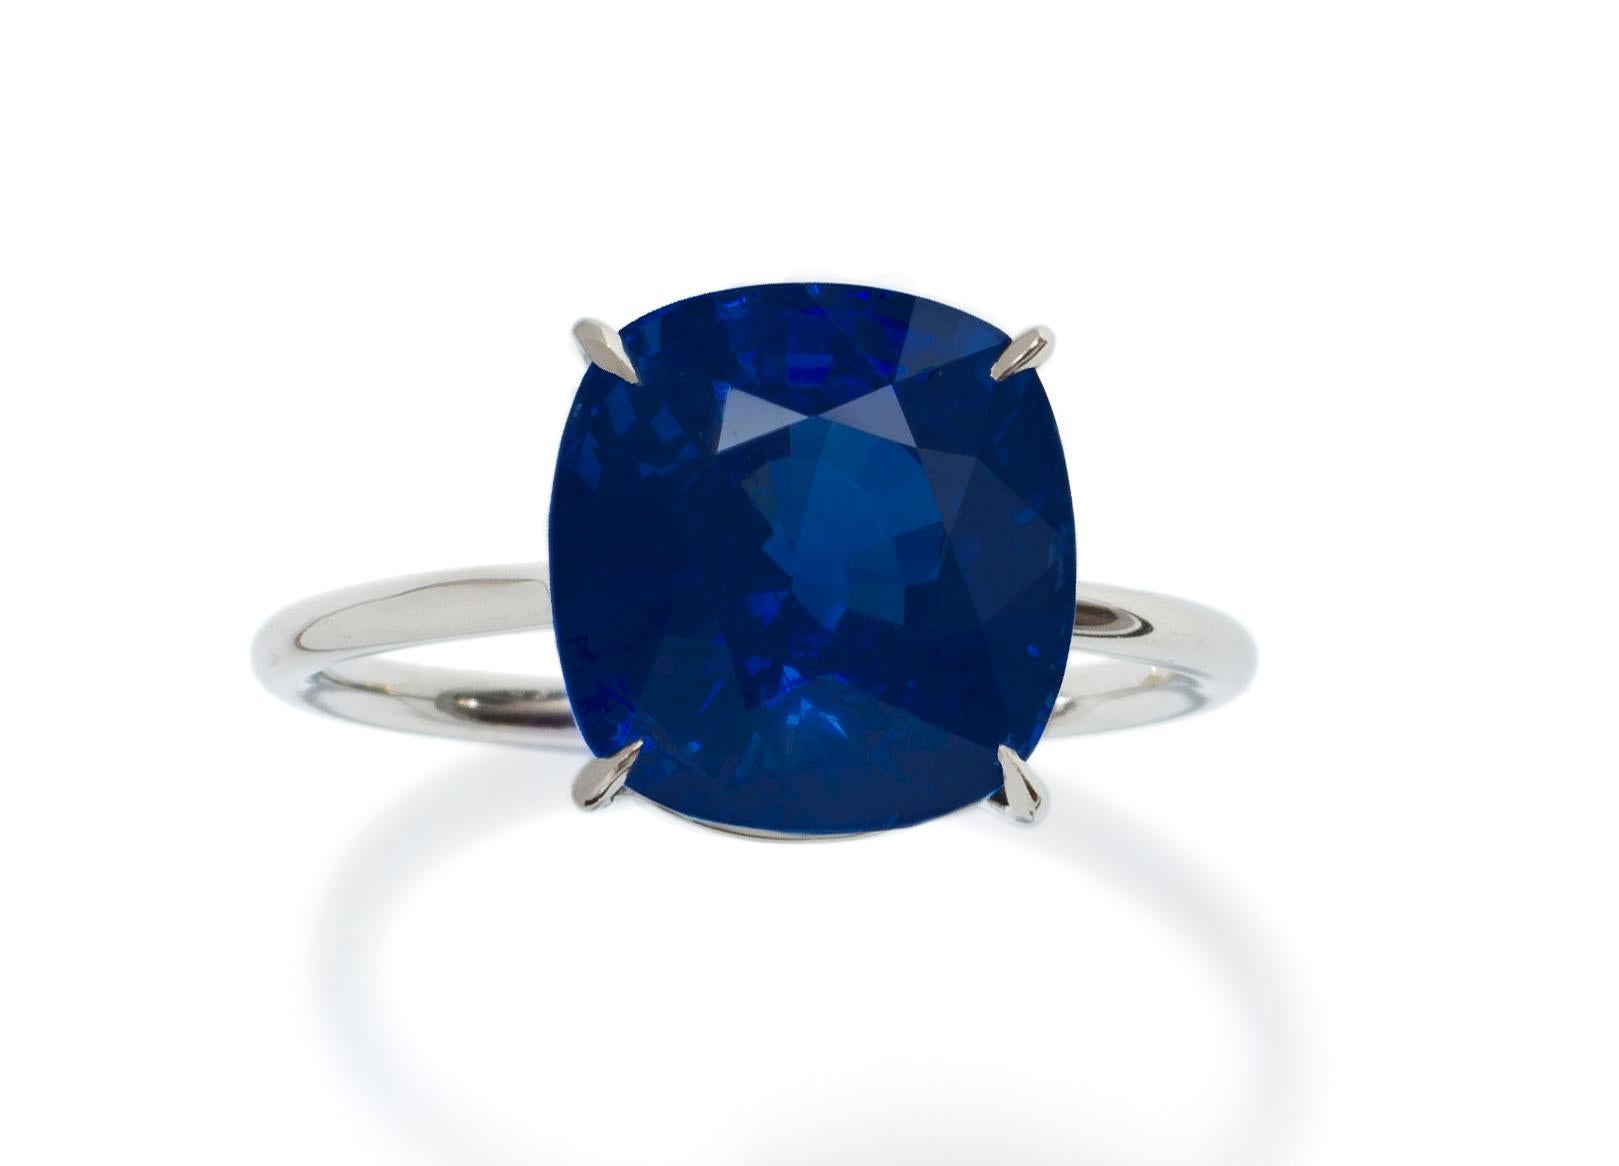 Featuring a natural cushion-cut blue sapphire weighing 7.11 carats. Accompanied by a Gübelin gemological report stating that the sapphire is of Burmese origin with no trace of thermal enhancement. Mounted in 18k white gold. Made in Switzerland.